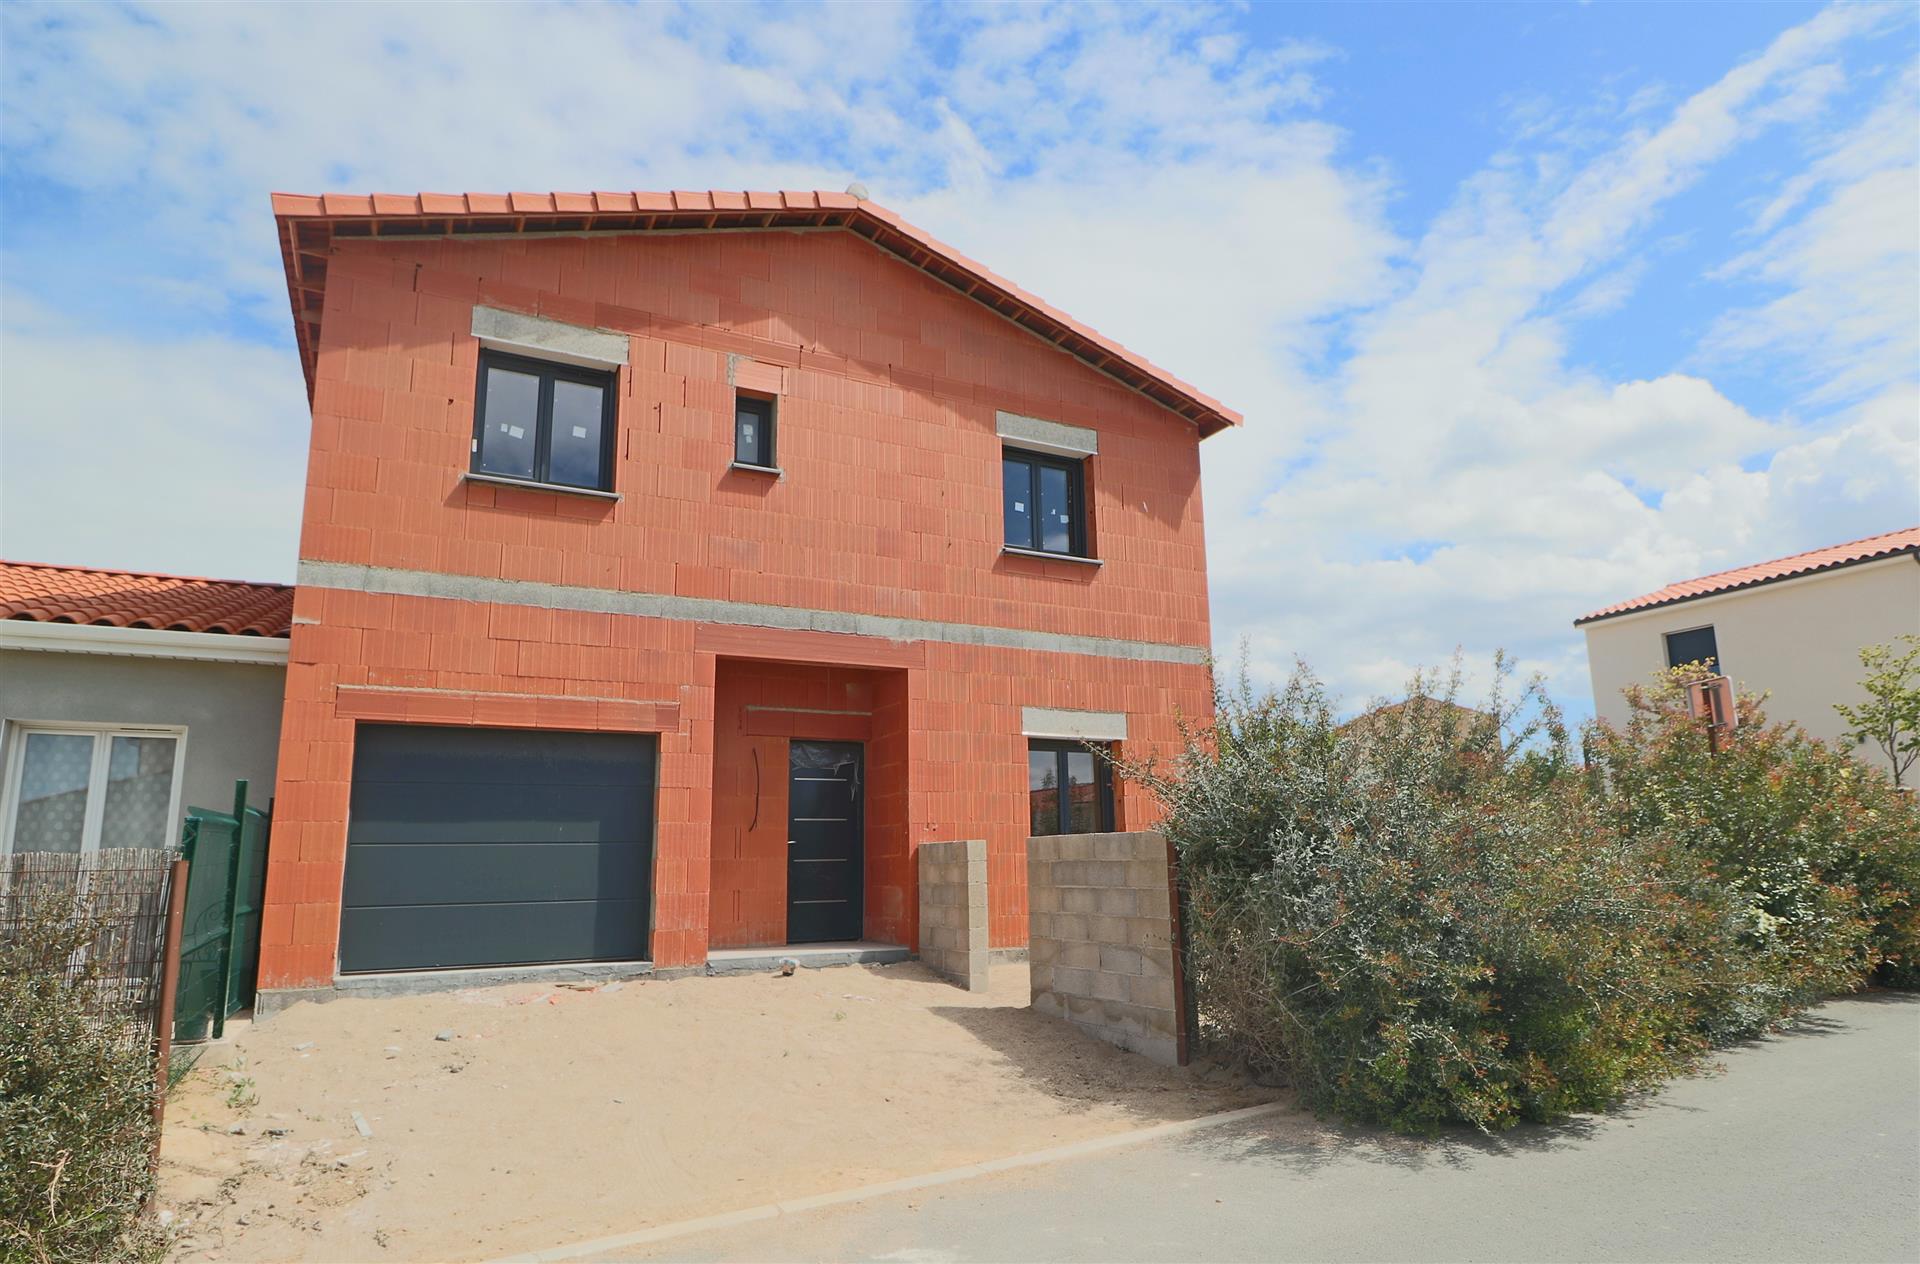 4 bedroom villa of 112 m2 living space in Nissan-lez-Enserune, between Béziers and Narbonne